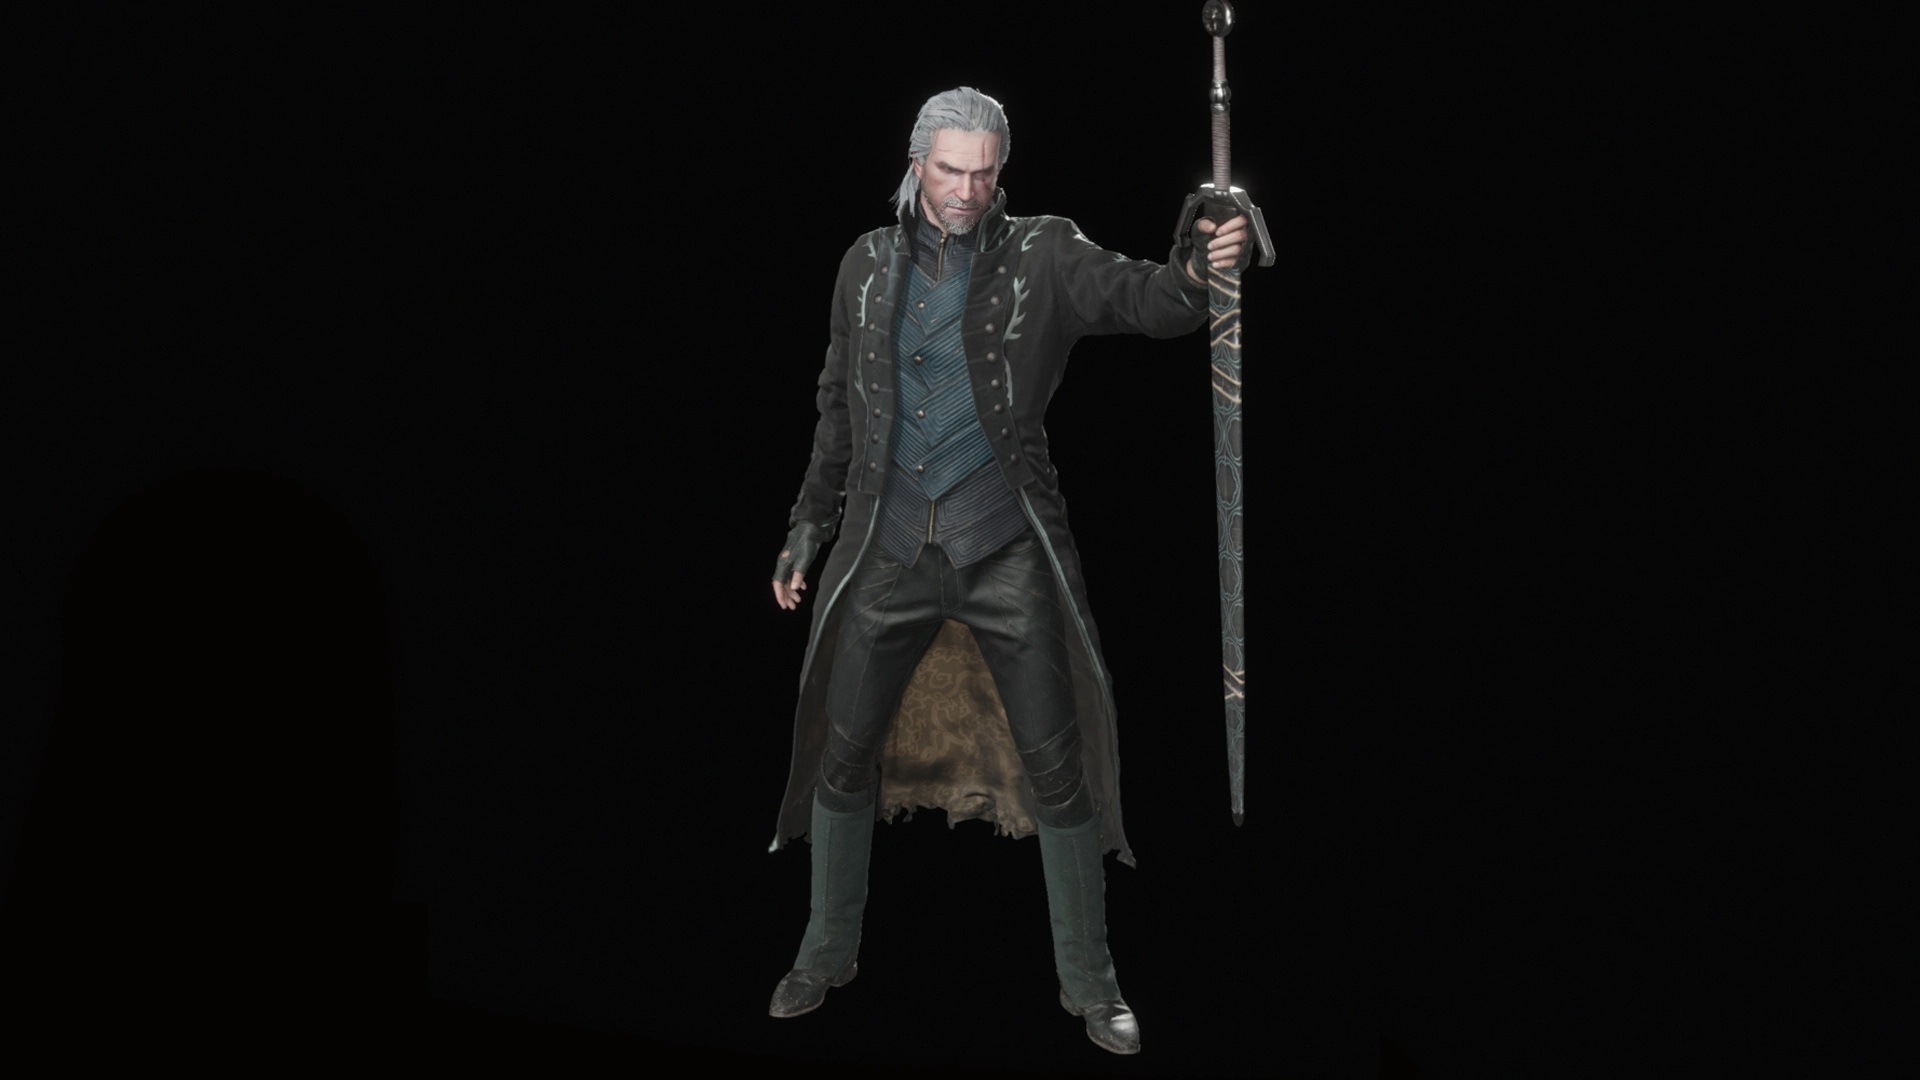 Steam Community :: Guide :: Tutorial for Changing Textures in Devil May Cry  5